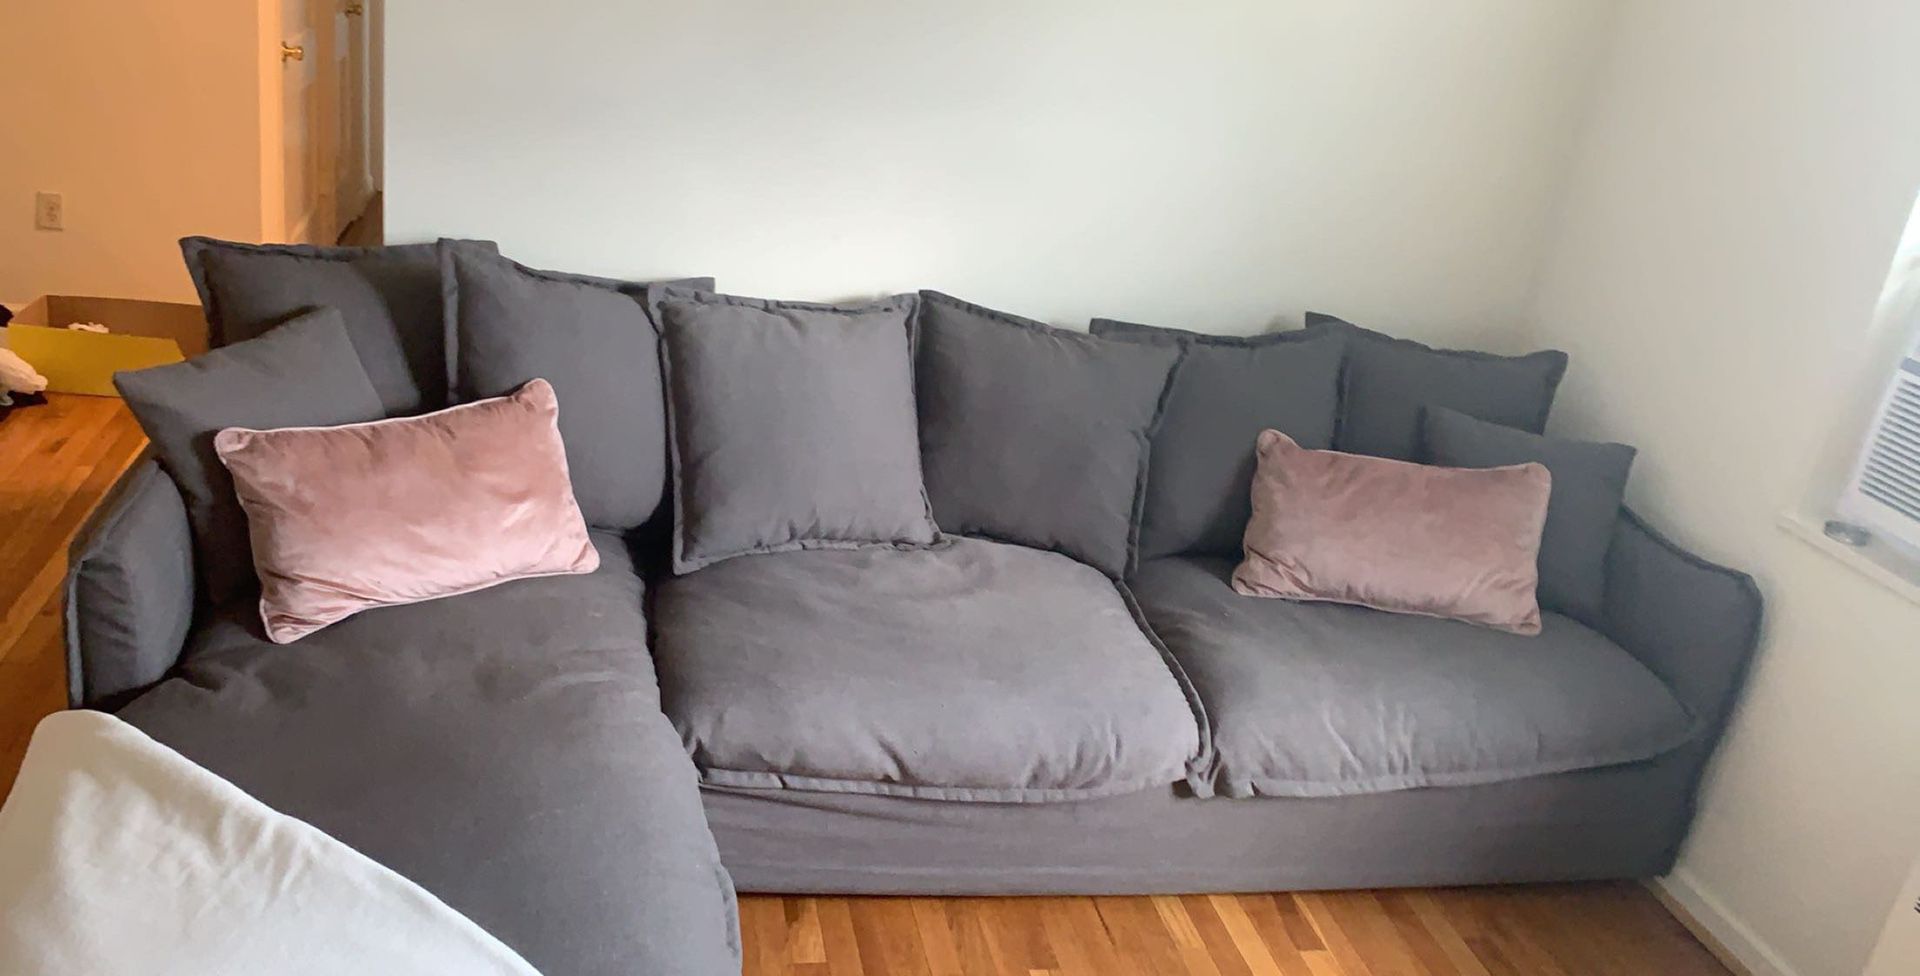 Medium sectional couch